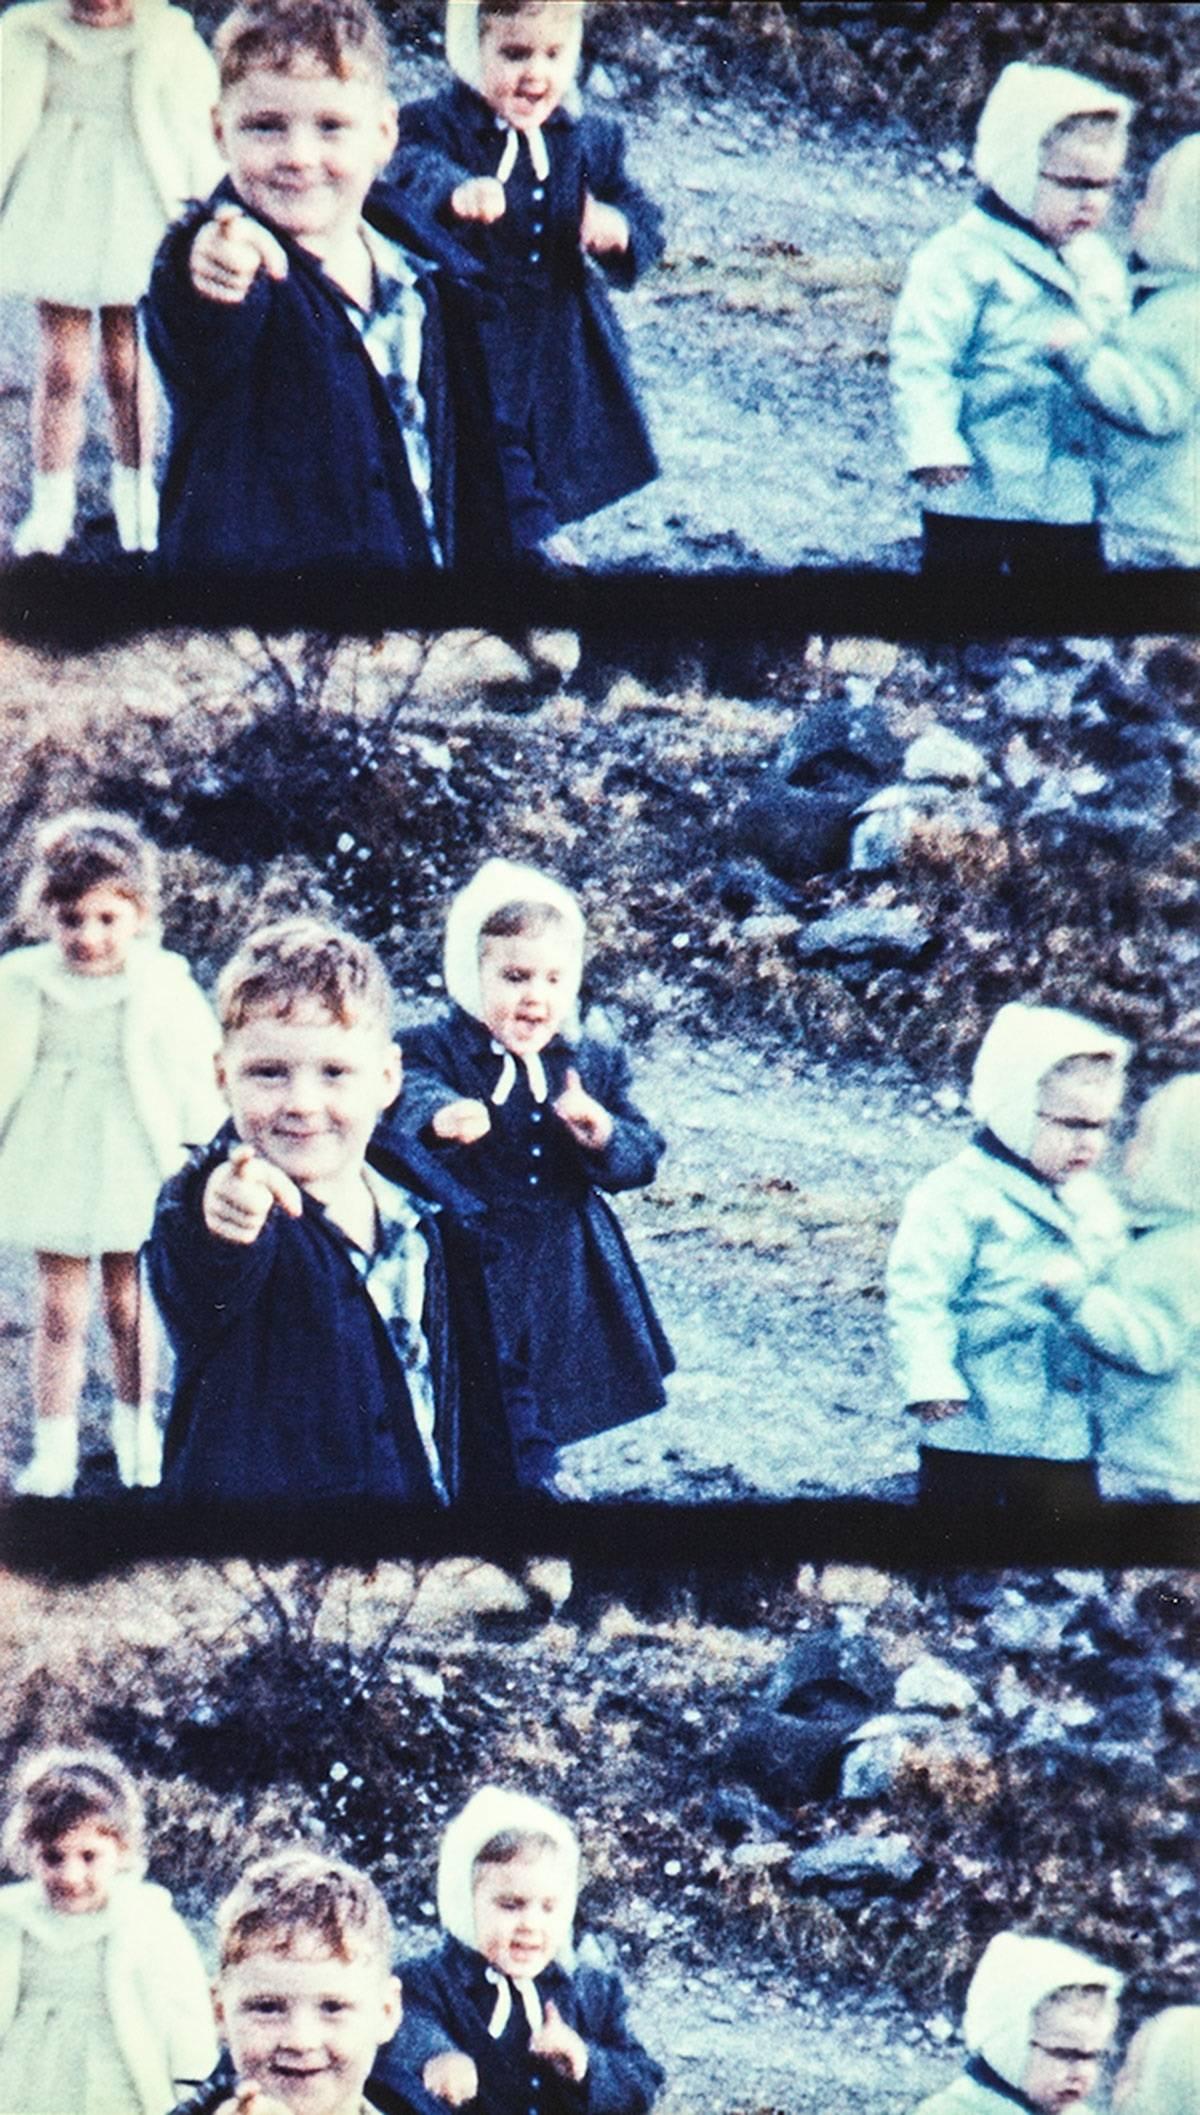 You (Five Children) Vintage Cibachrome Print - Photograph by Marianne Courville